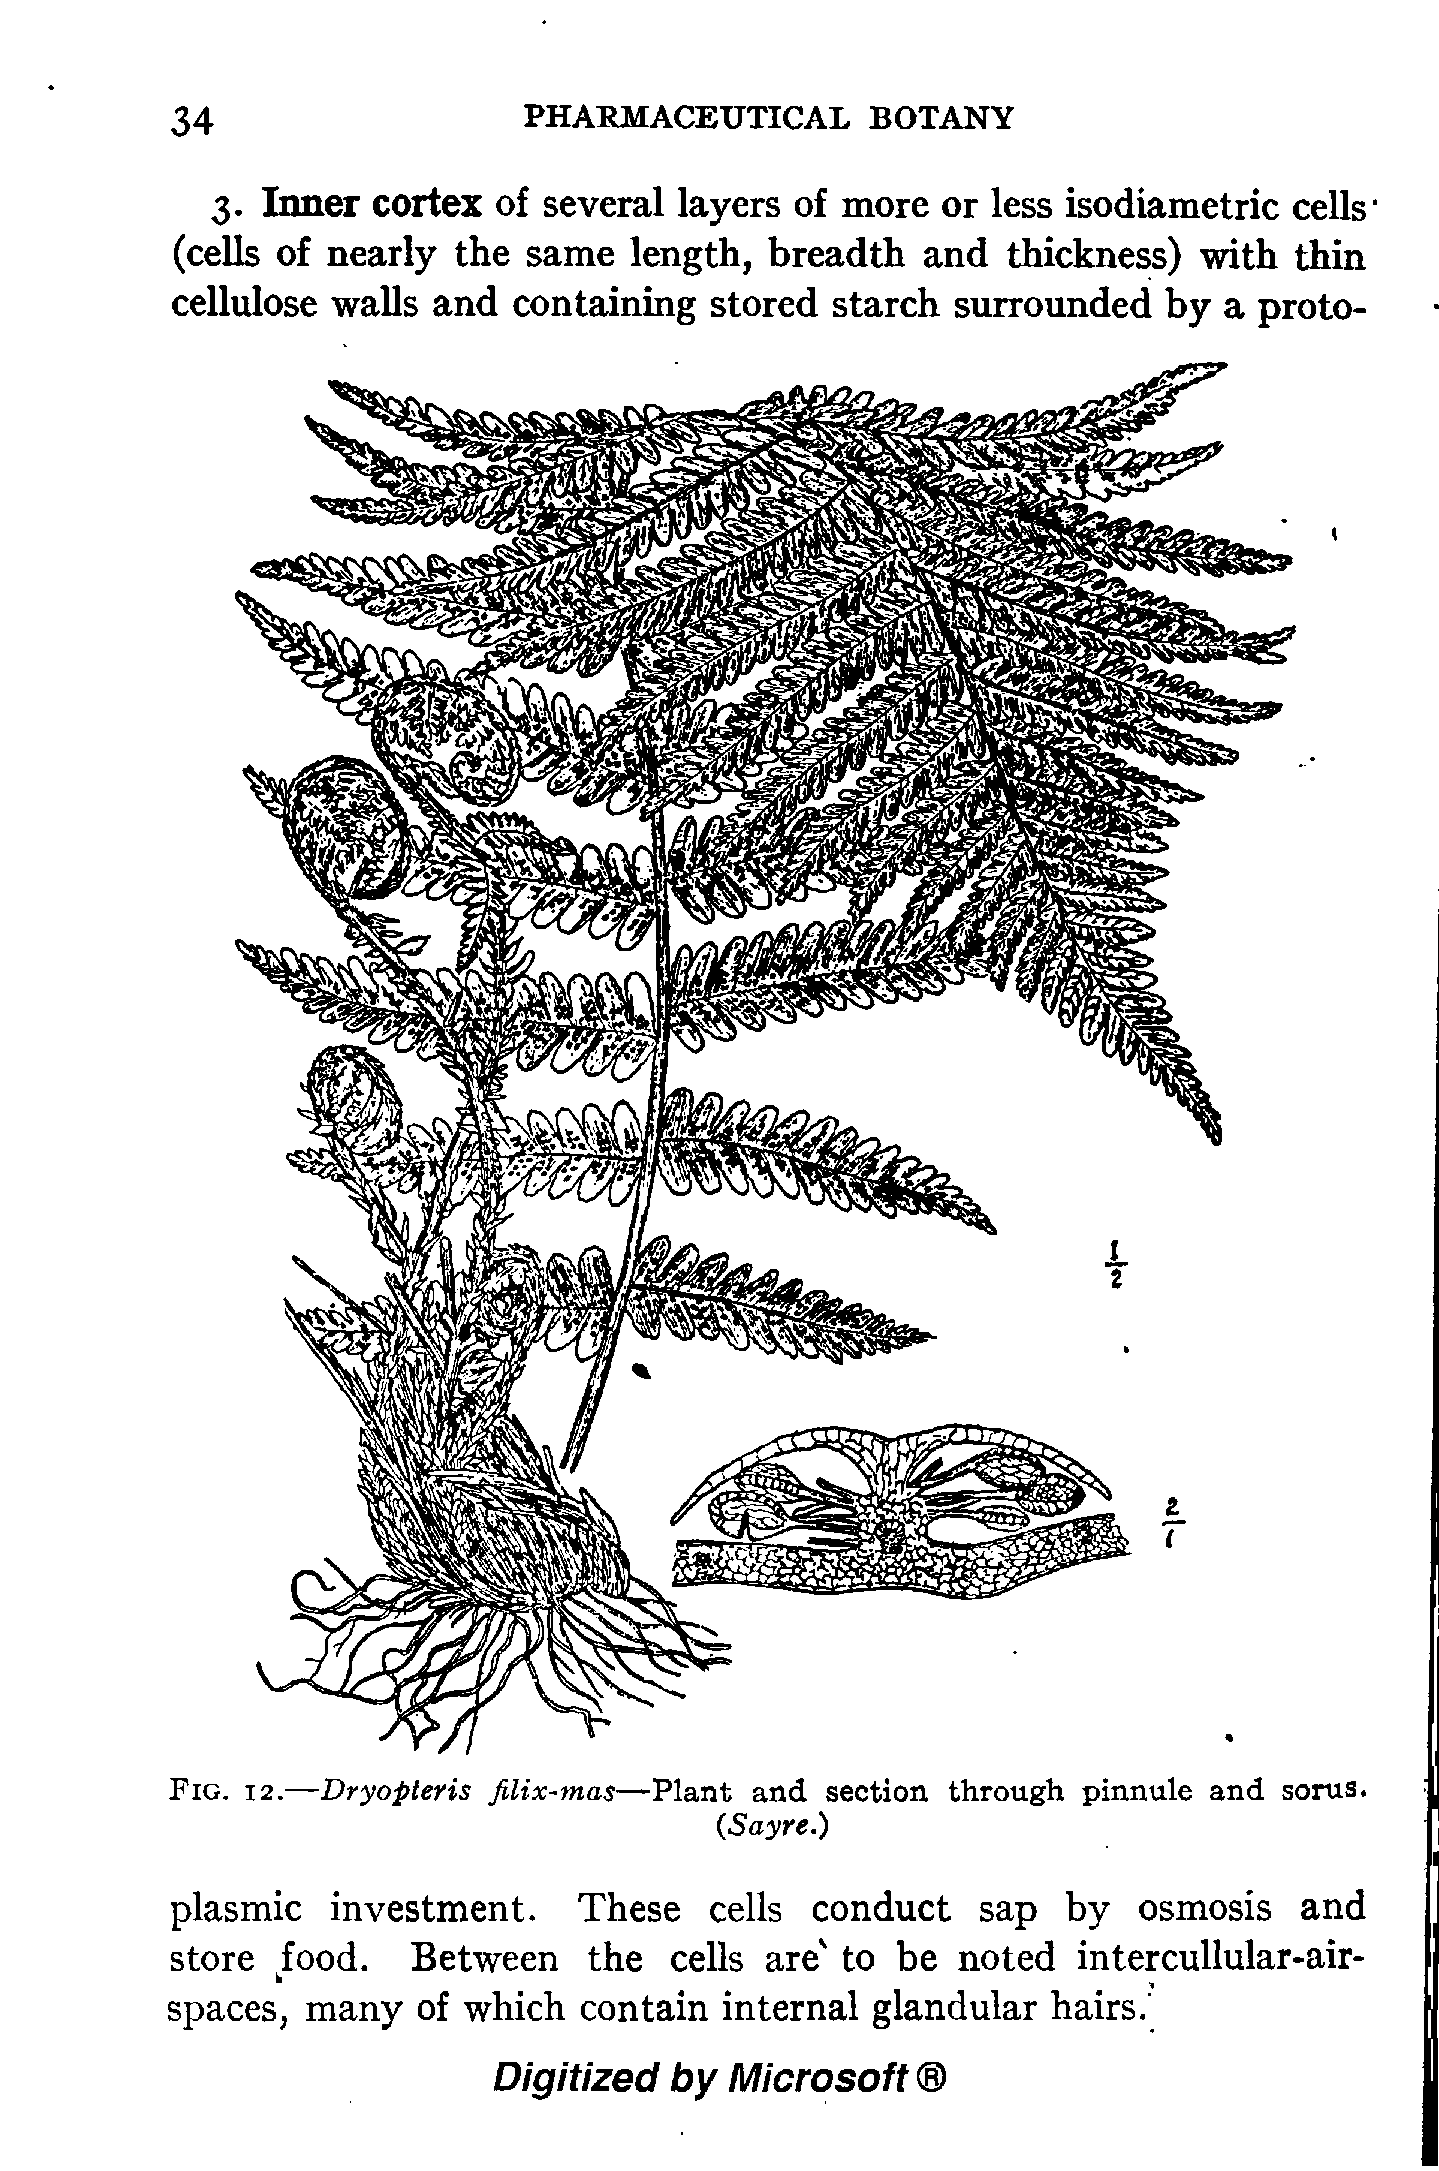 Fig. 12.—Dryopteris filix-mas—Plant and section through pinnule and sorus.